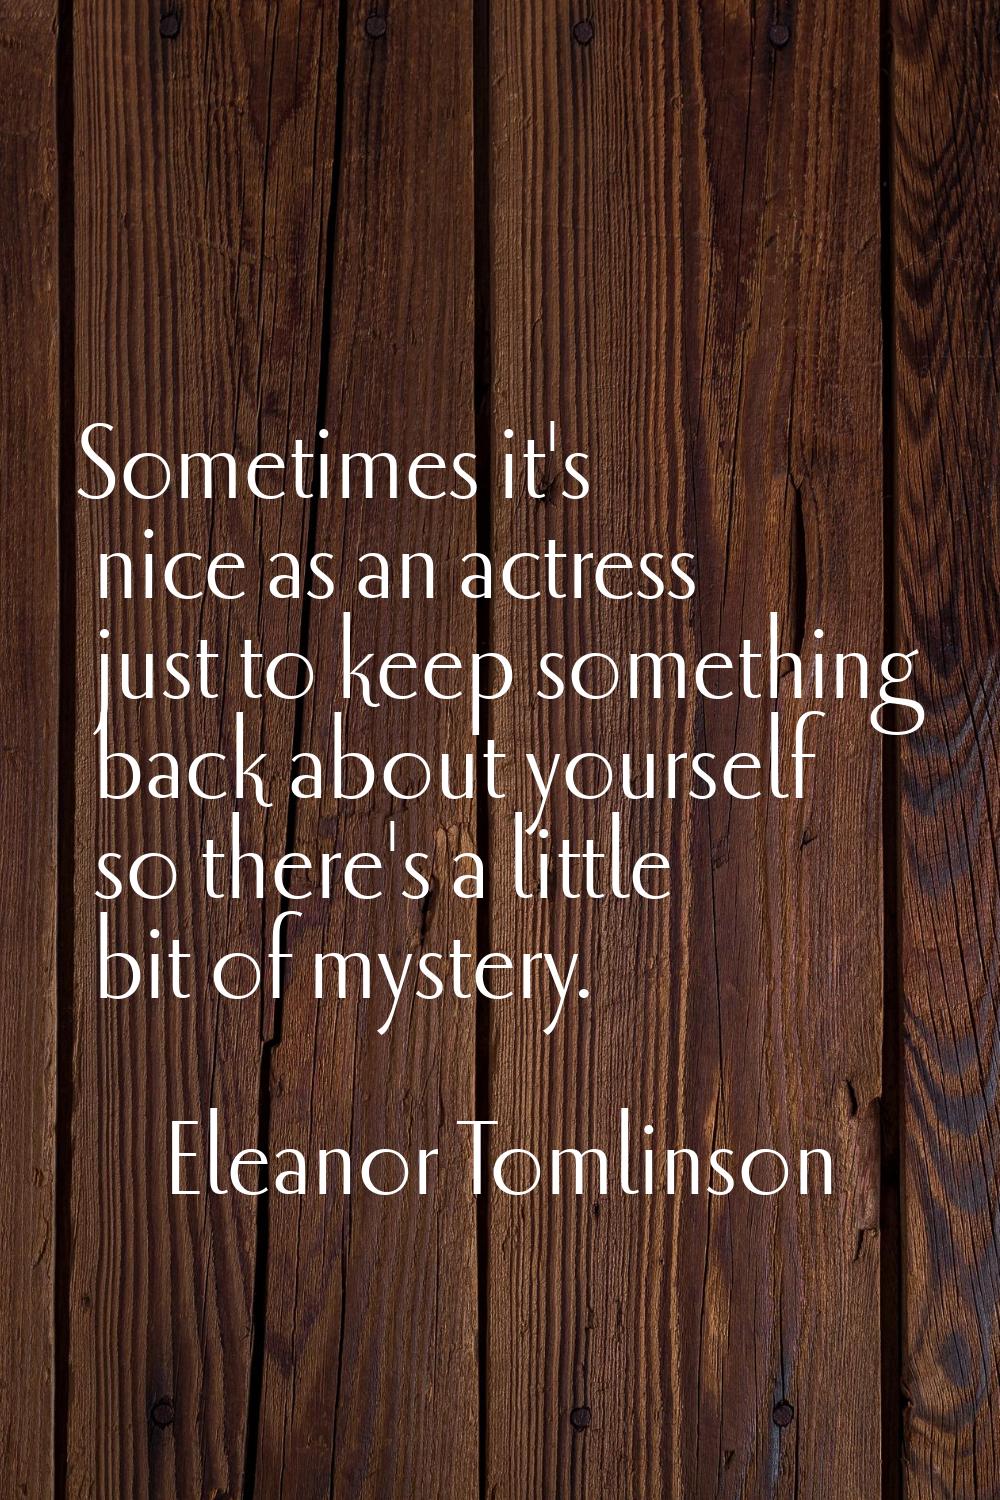 Sometimes it's nice as an actress just to keep something back about yourself so there's a little bi